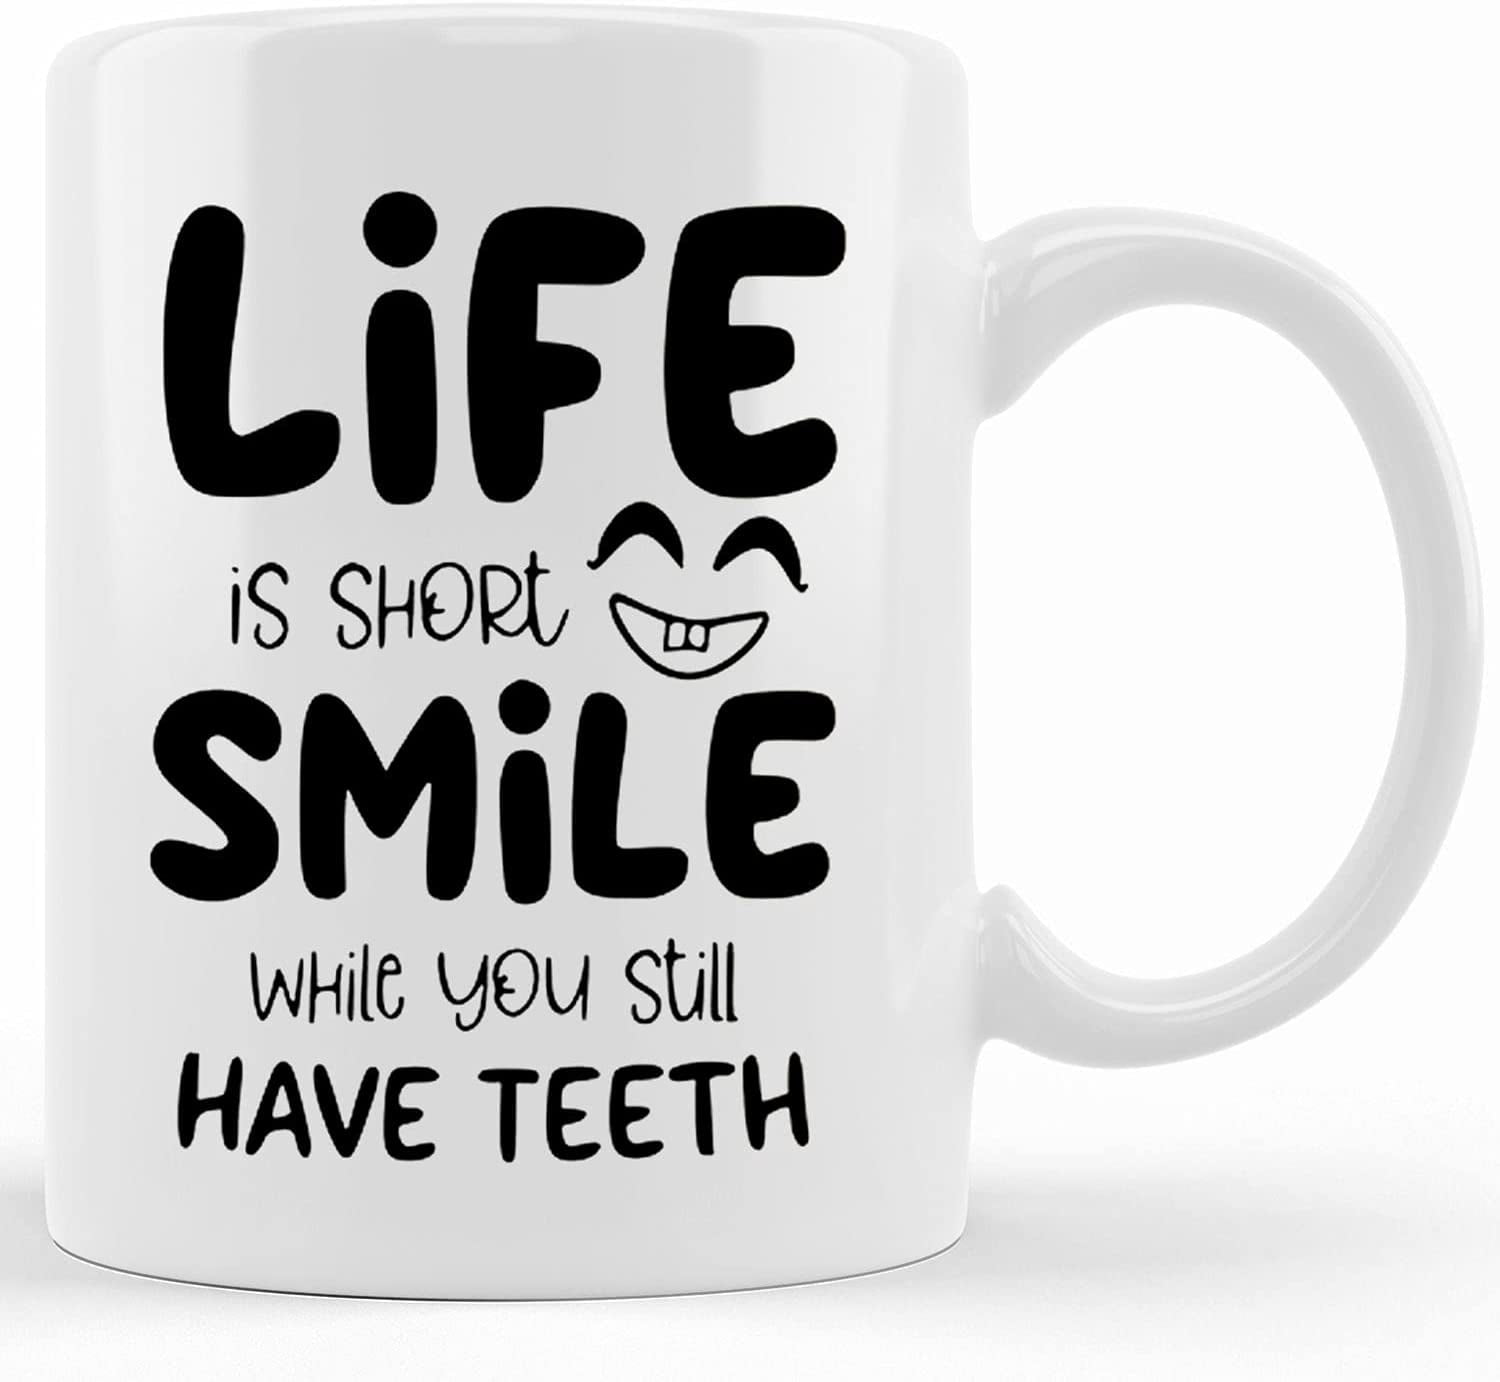 Life is short Coffee Mug - 11 oz. Life is short smile while you still have  teeth funny gift.